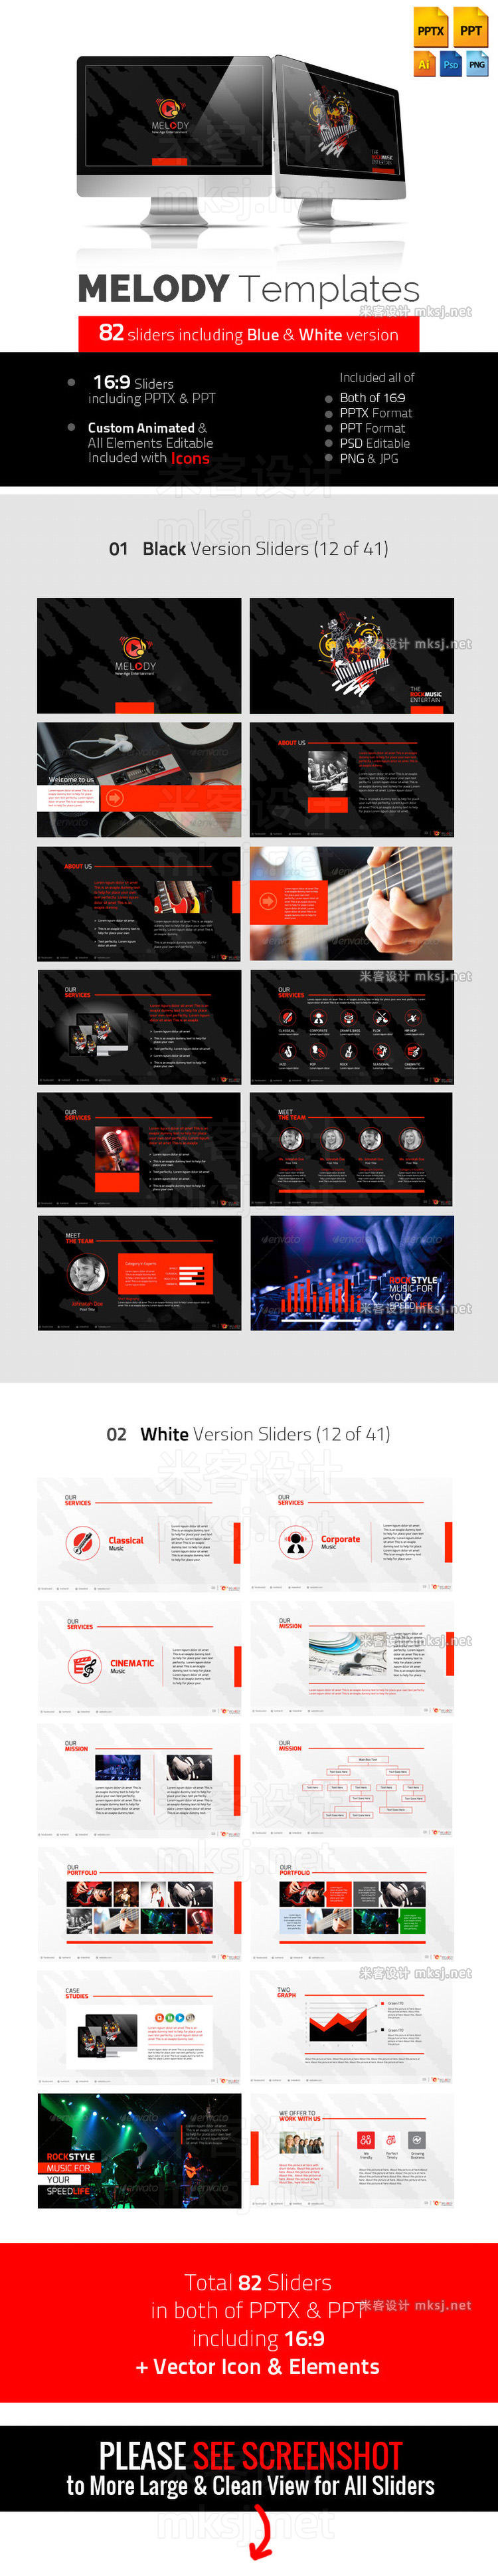 PPT模板 melody professional multimedia templates